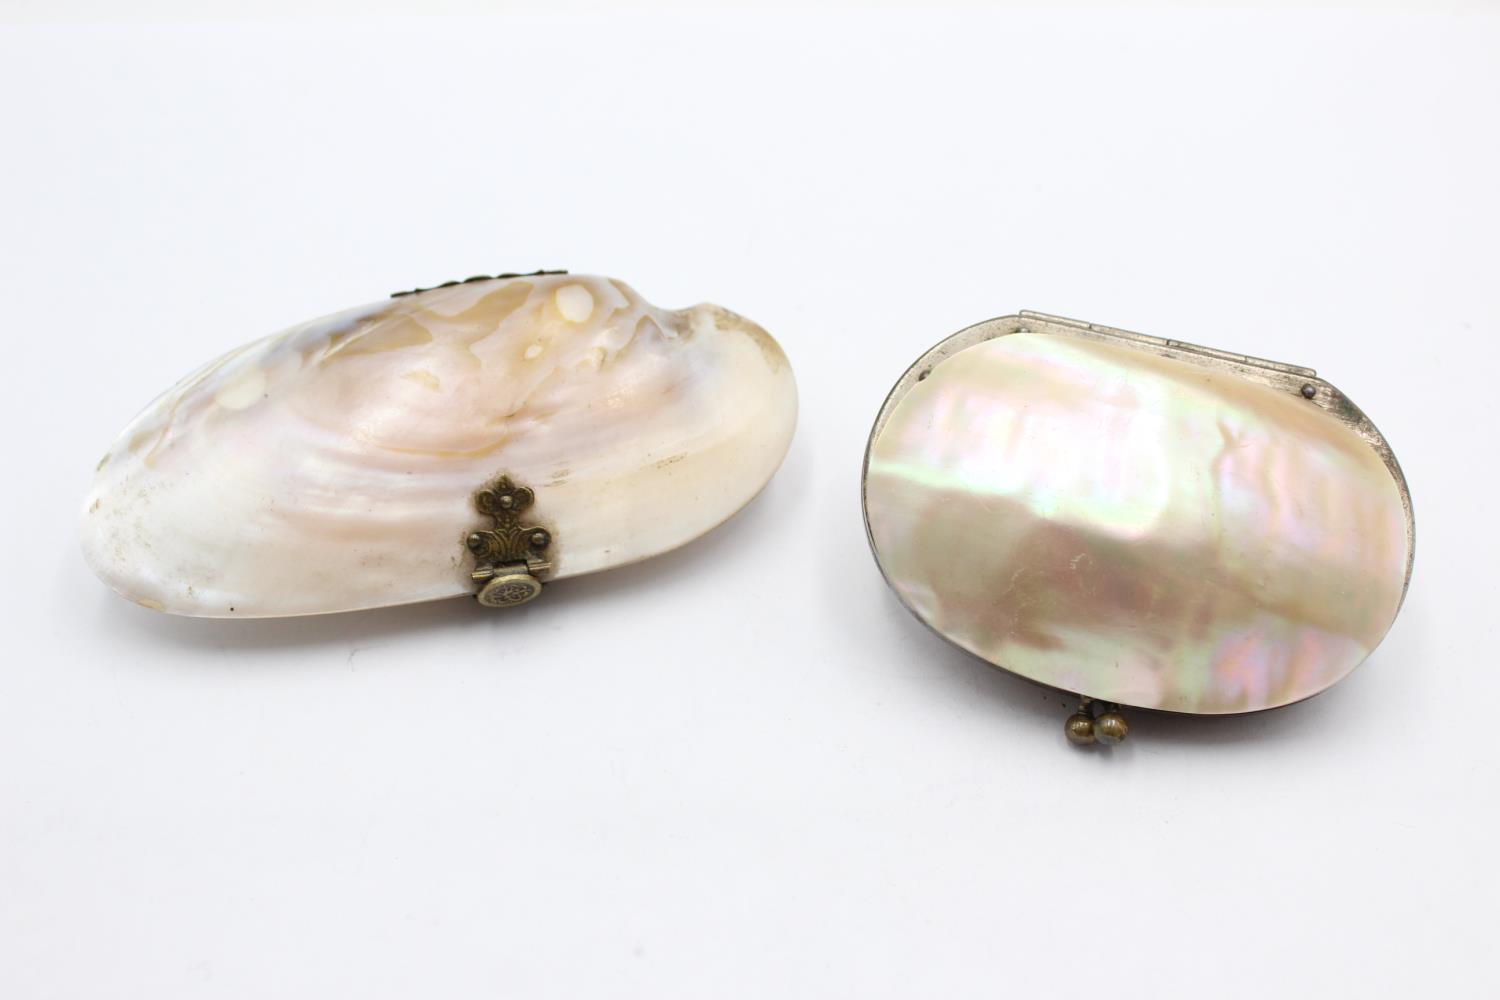 2 x Antique / Vintage Ladies MOTHER OF PEARL Shell Coin Purses / Cases In antique / vintage